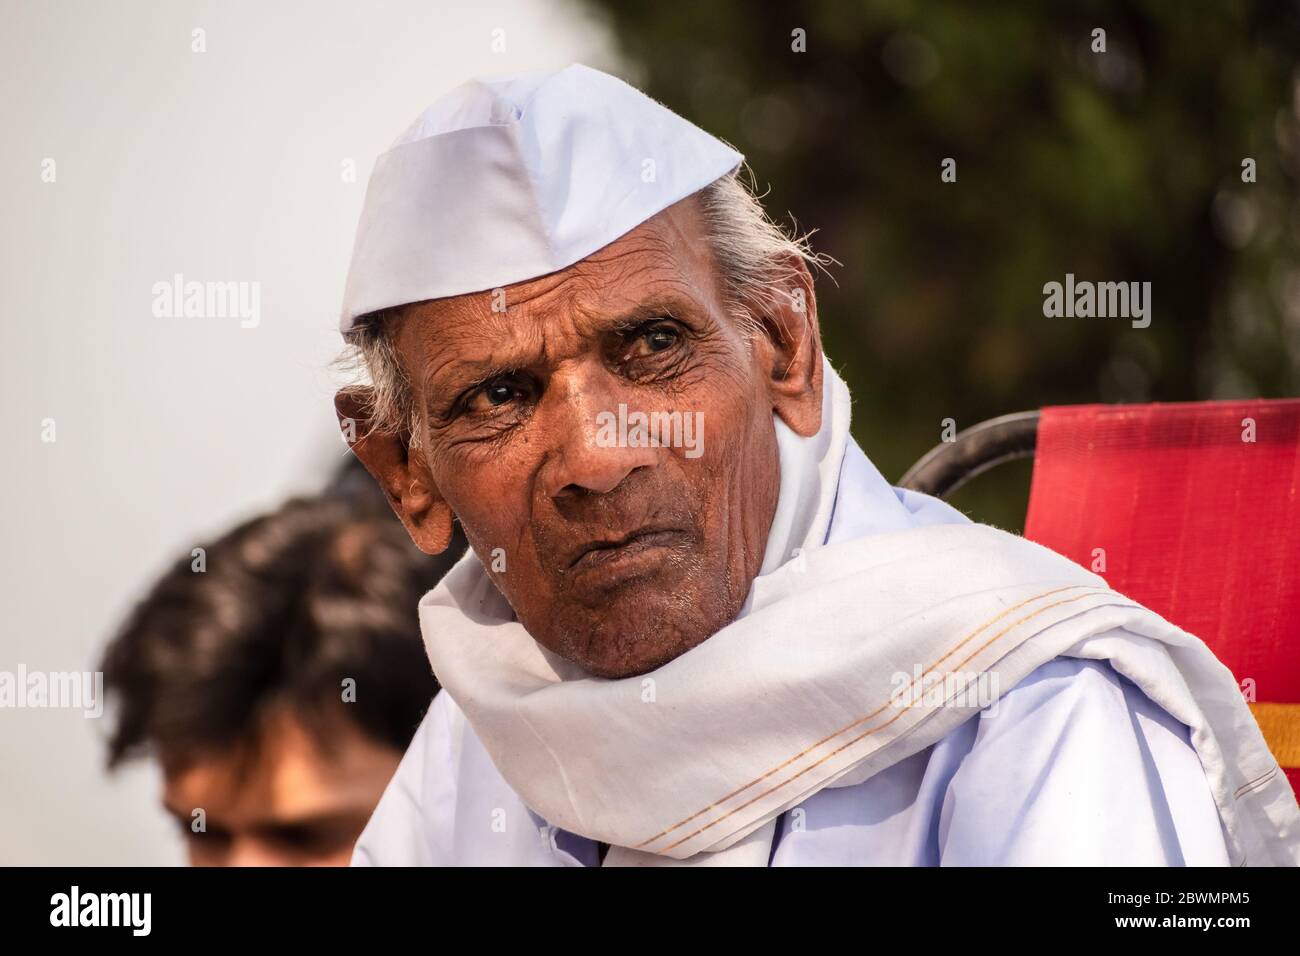 Nagpur, Maharashtra, India - March 2019: A candid close up portrait of an elderly Indian man wearing a Gandhi cap with a thoughtful expression on his Stock Photo